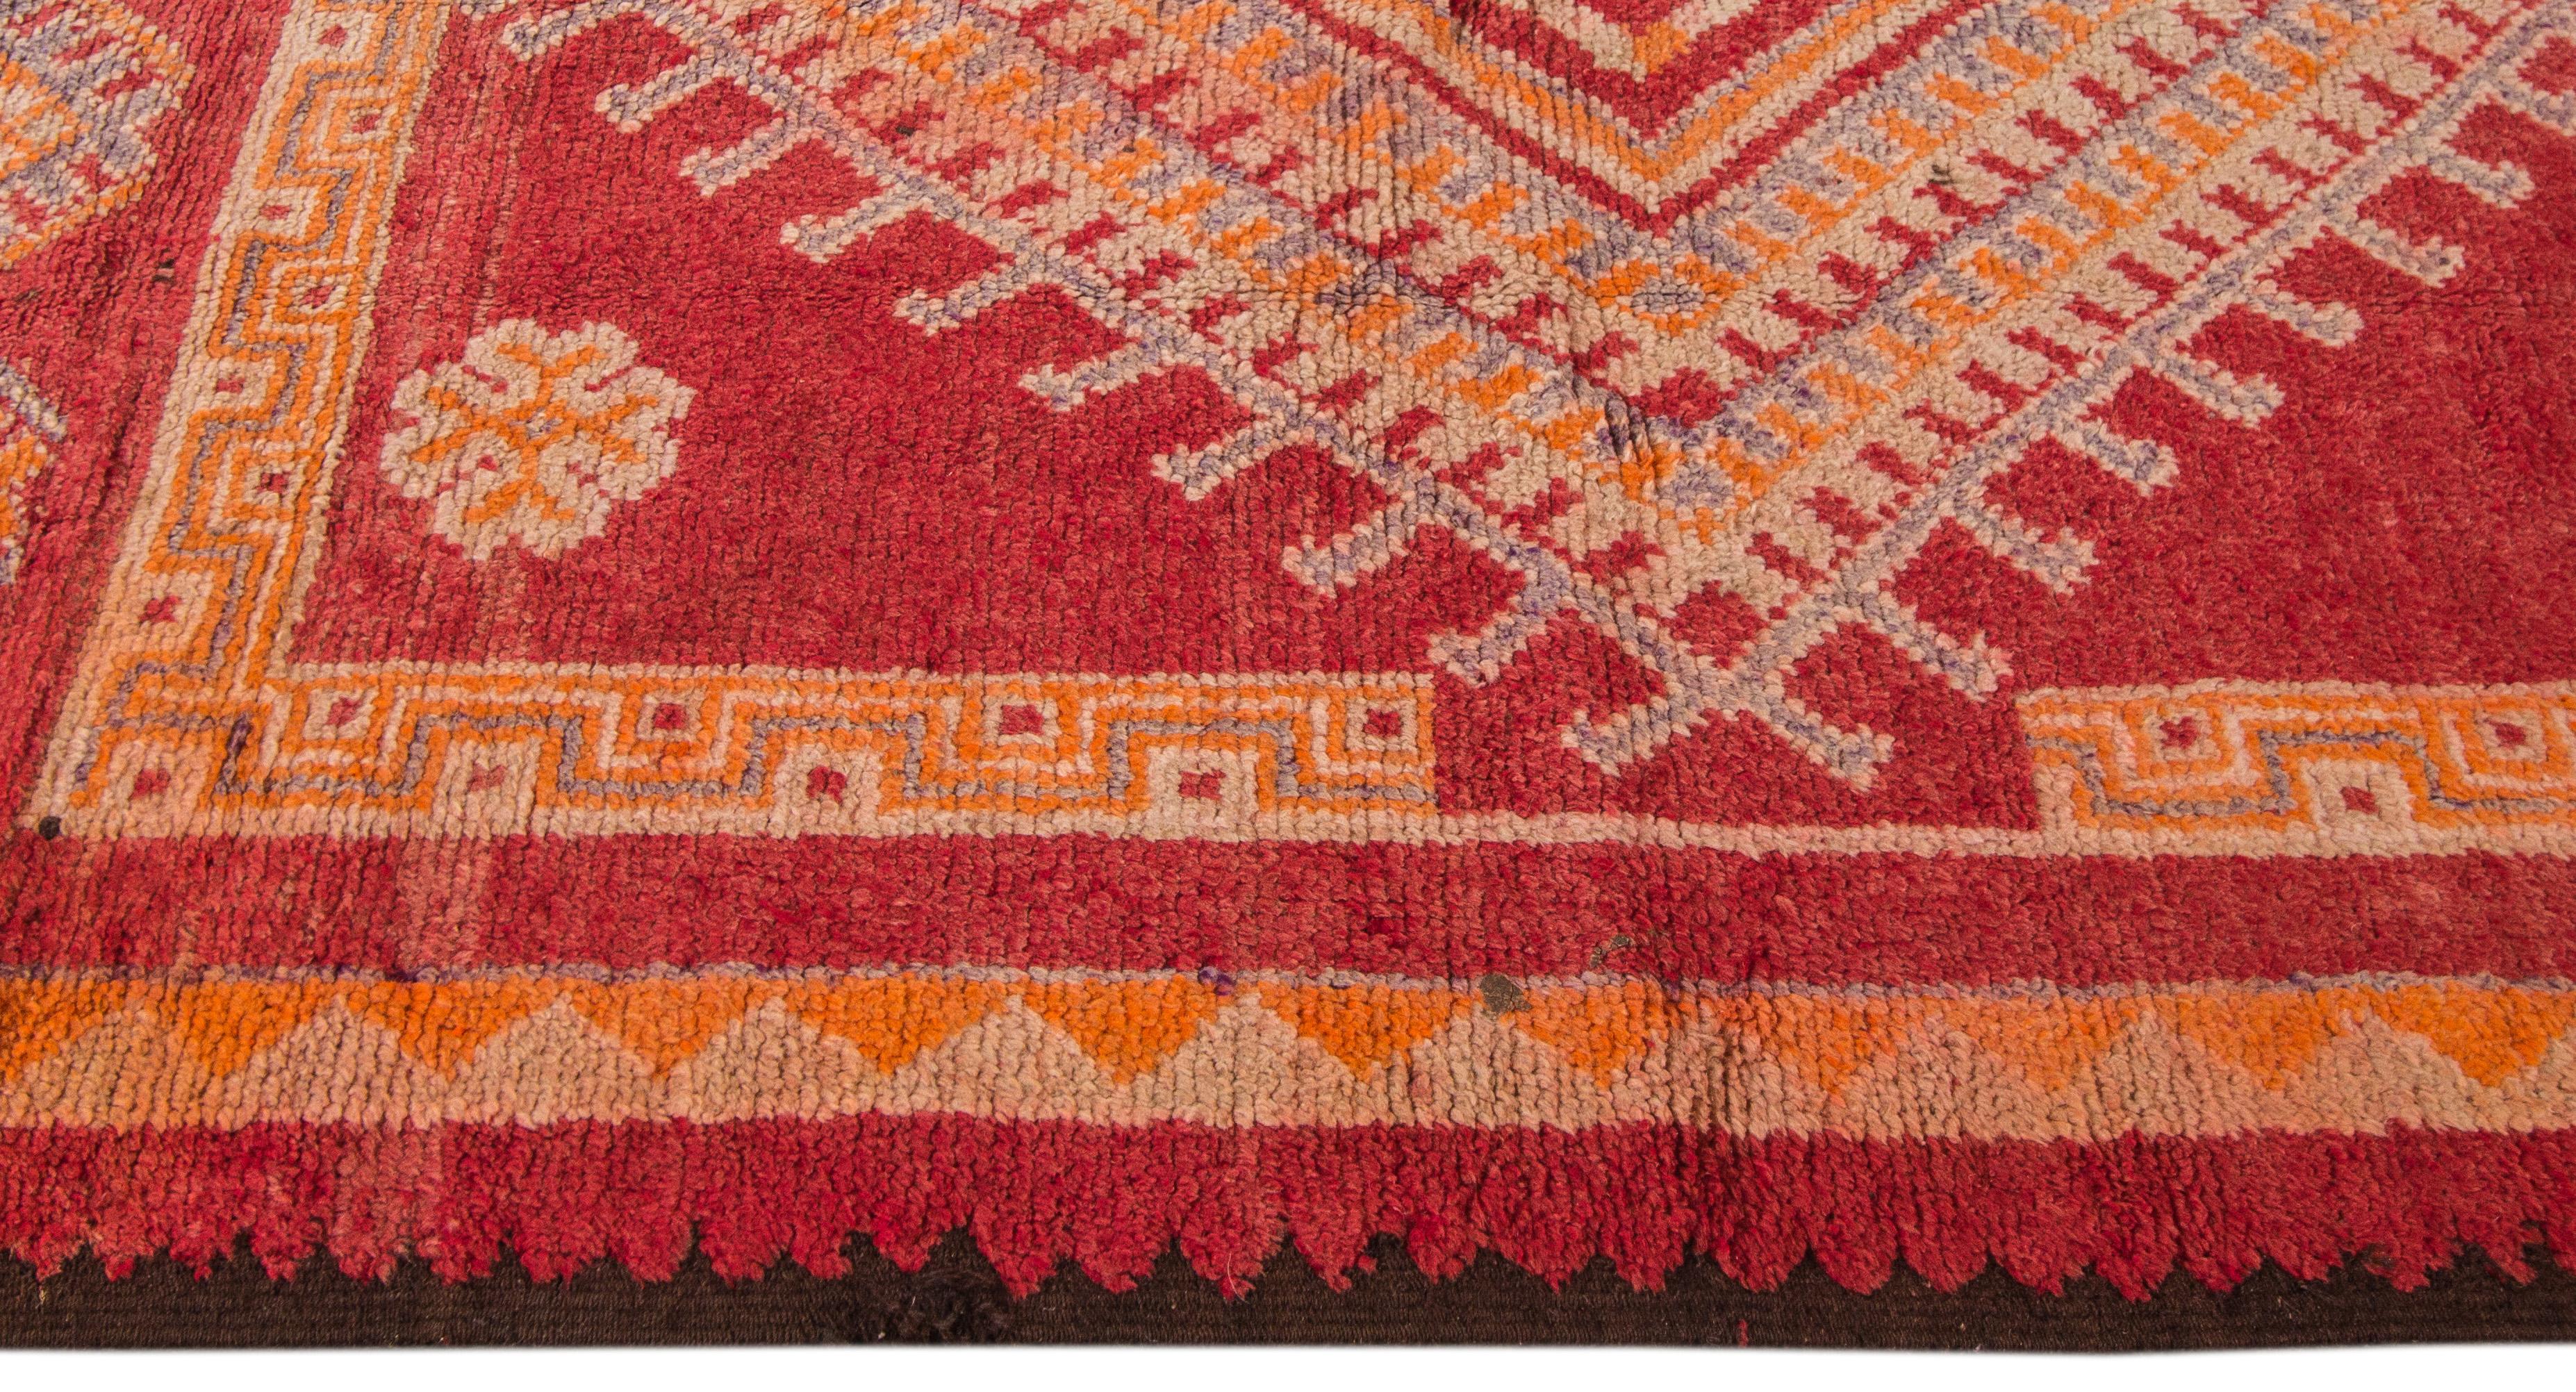 Mid-20th Century Vintage 1940s Red and Orange Moroccan Rug, 5.10x13.02 For Sale